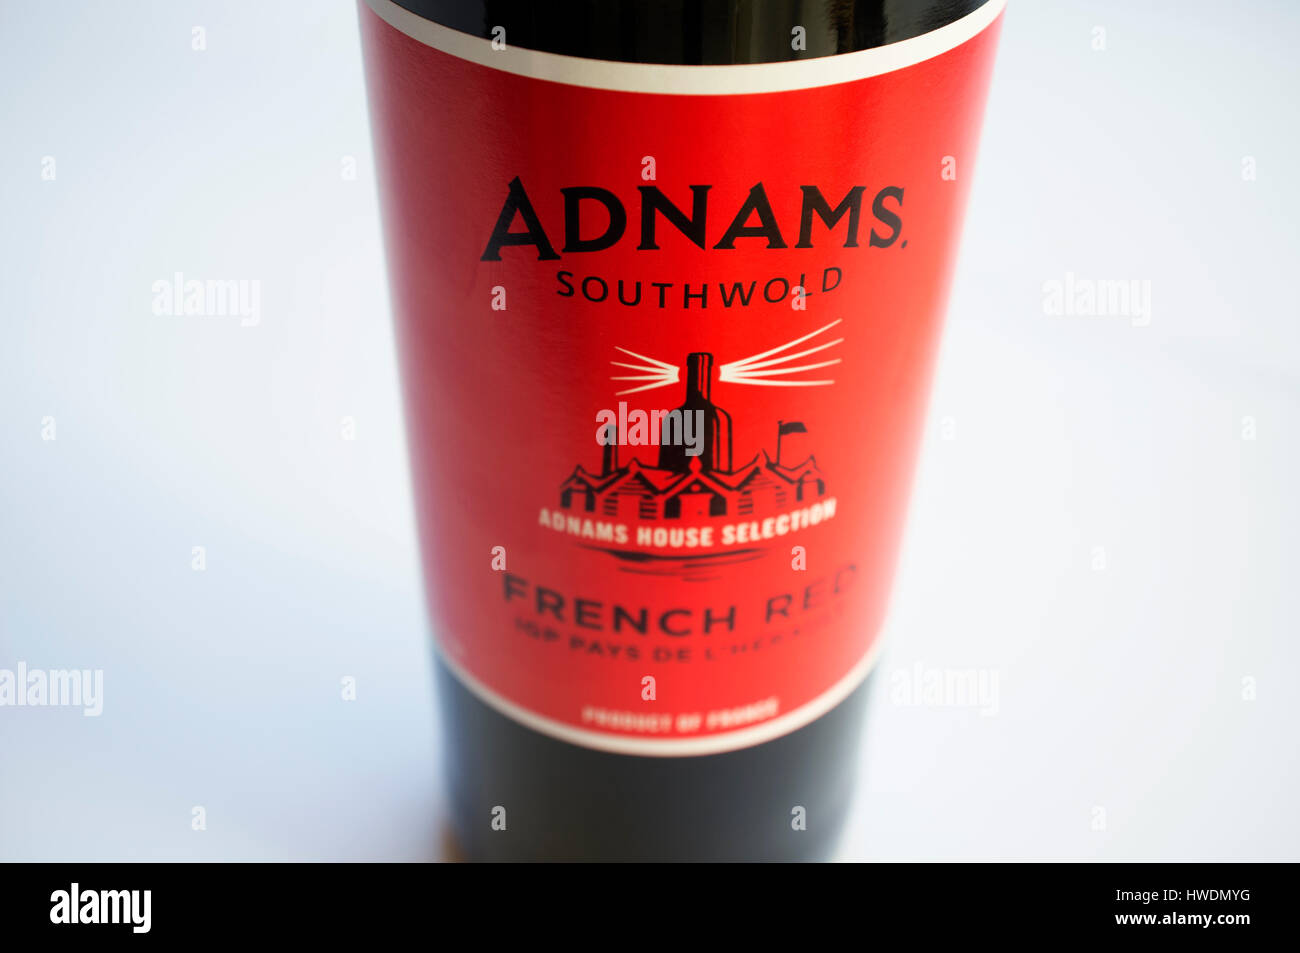 Adnams French Red wine Stock Photo